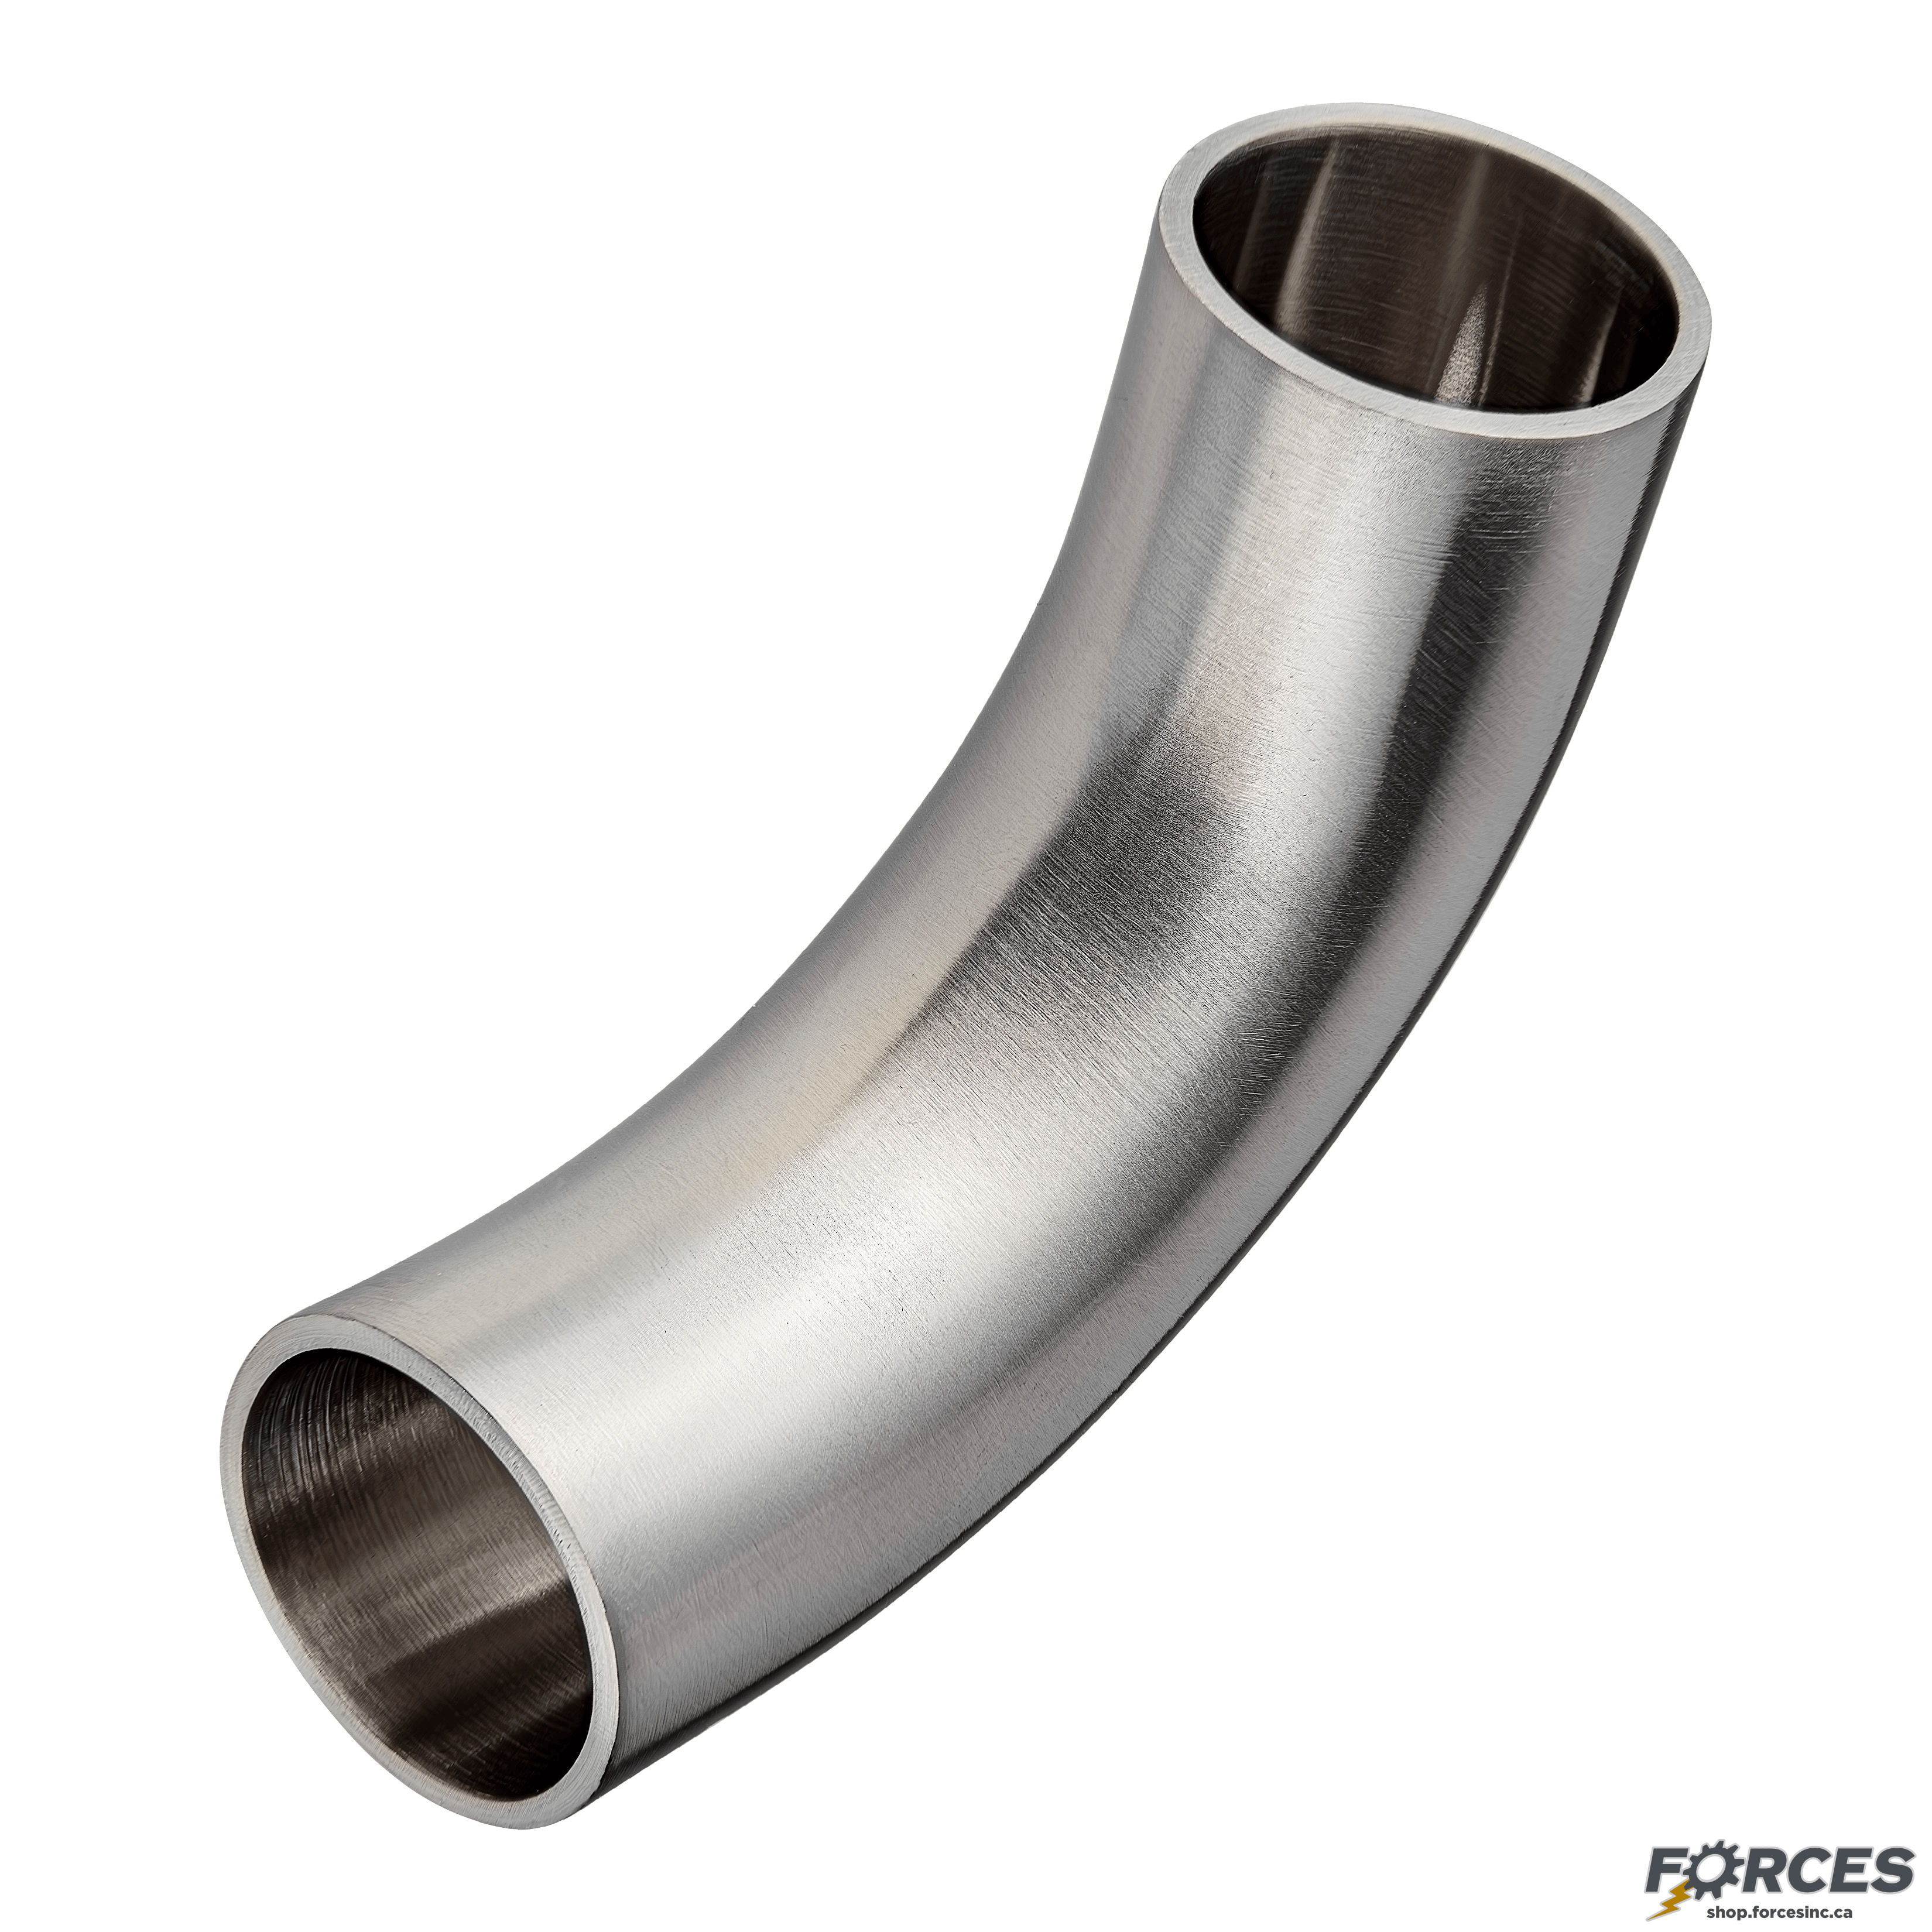 2-1/2" Butt Weld 90° Elbow Long Tangent - Stainless Steel 304 - Forces Inc